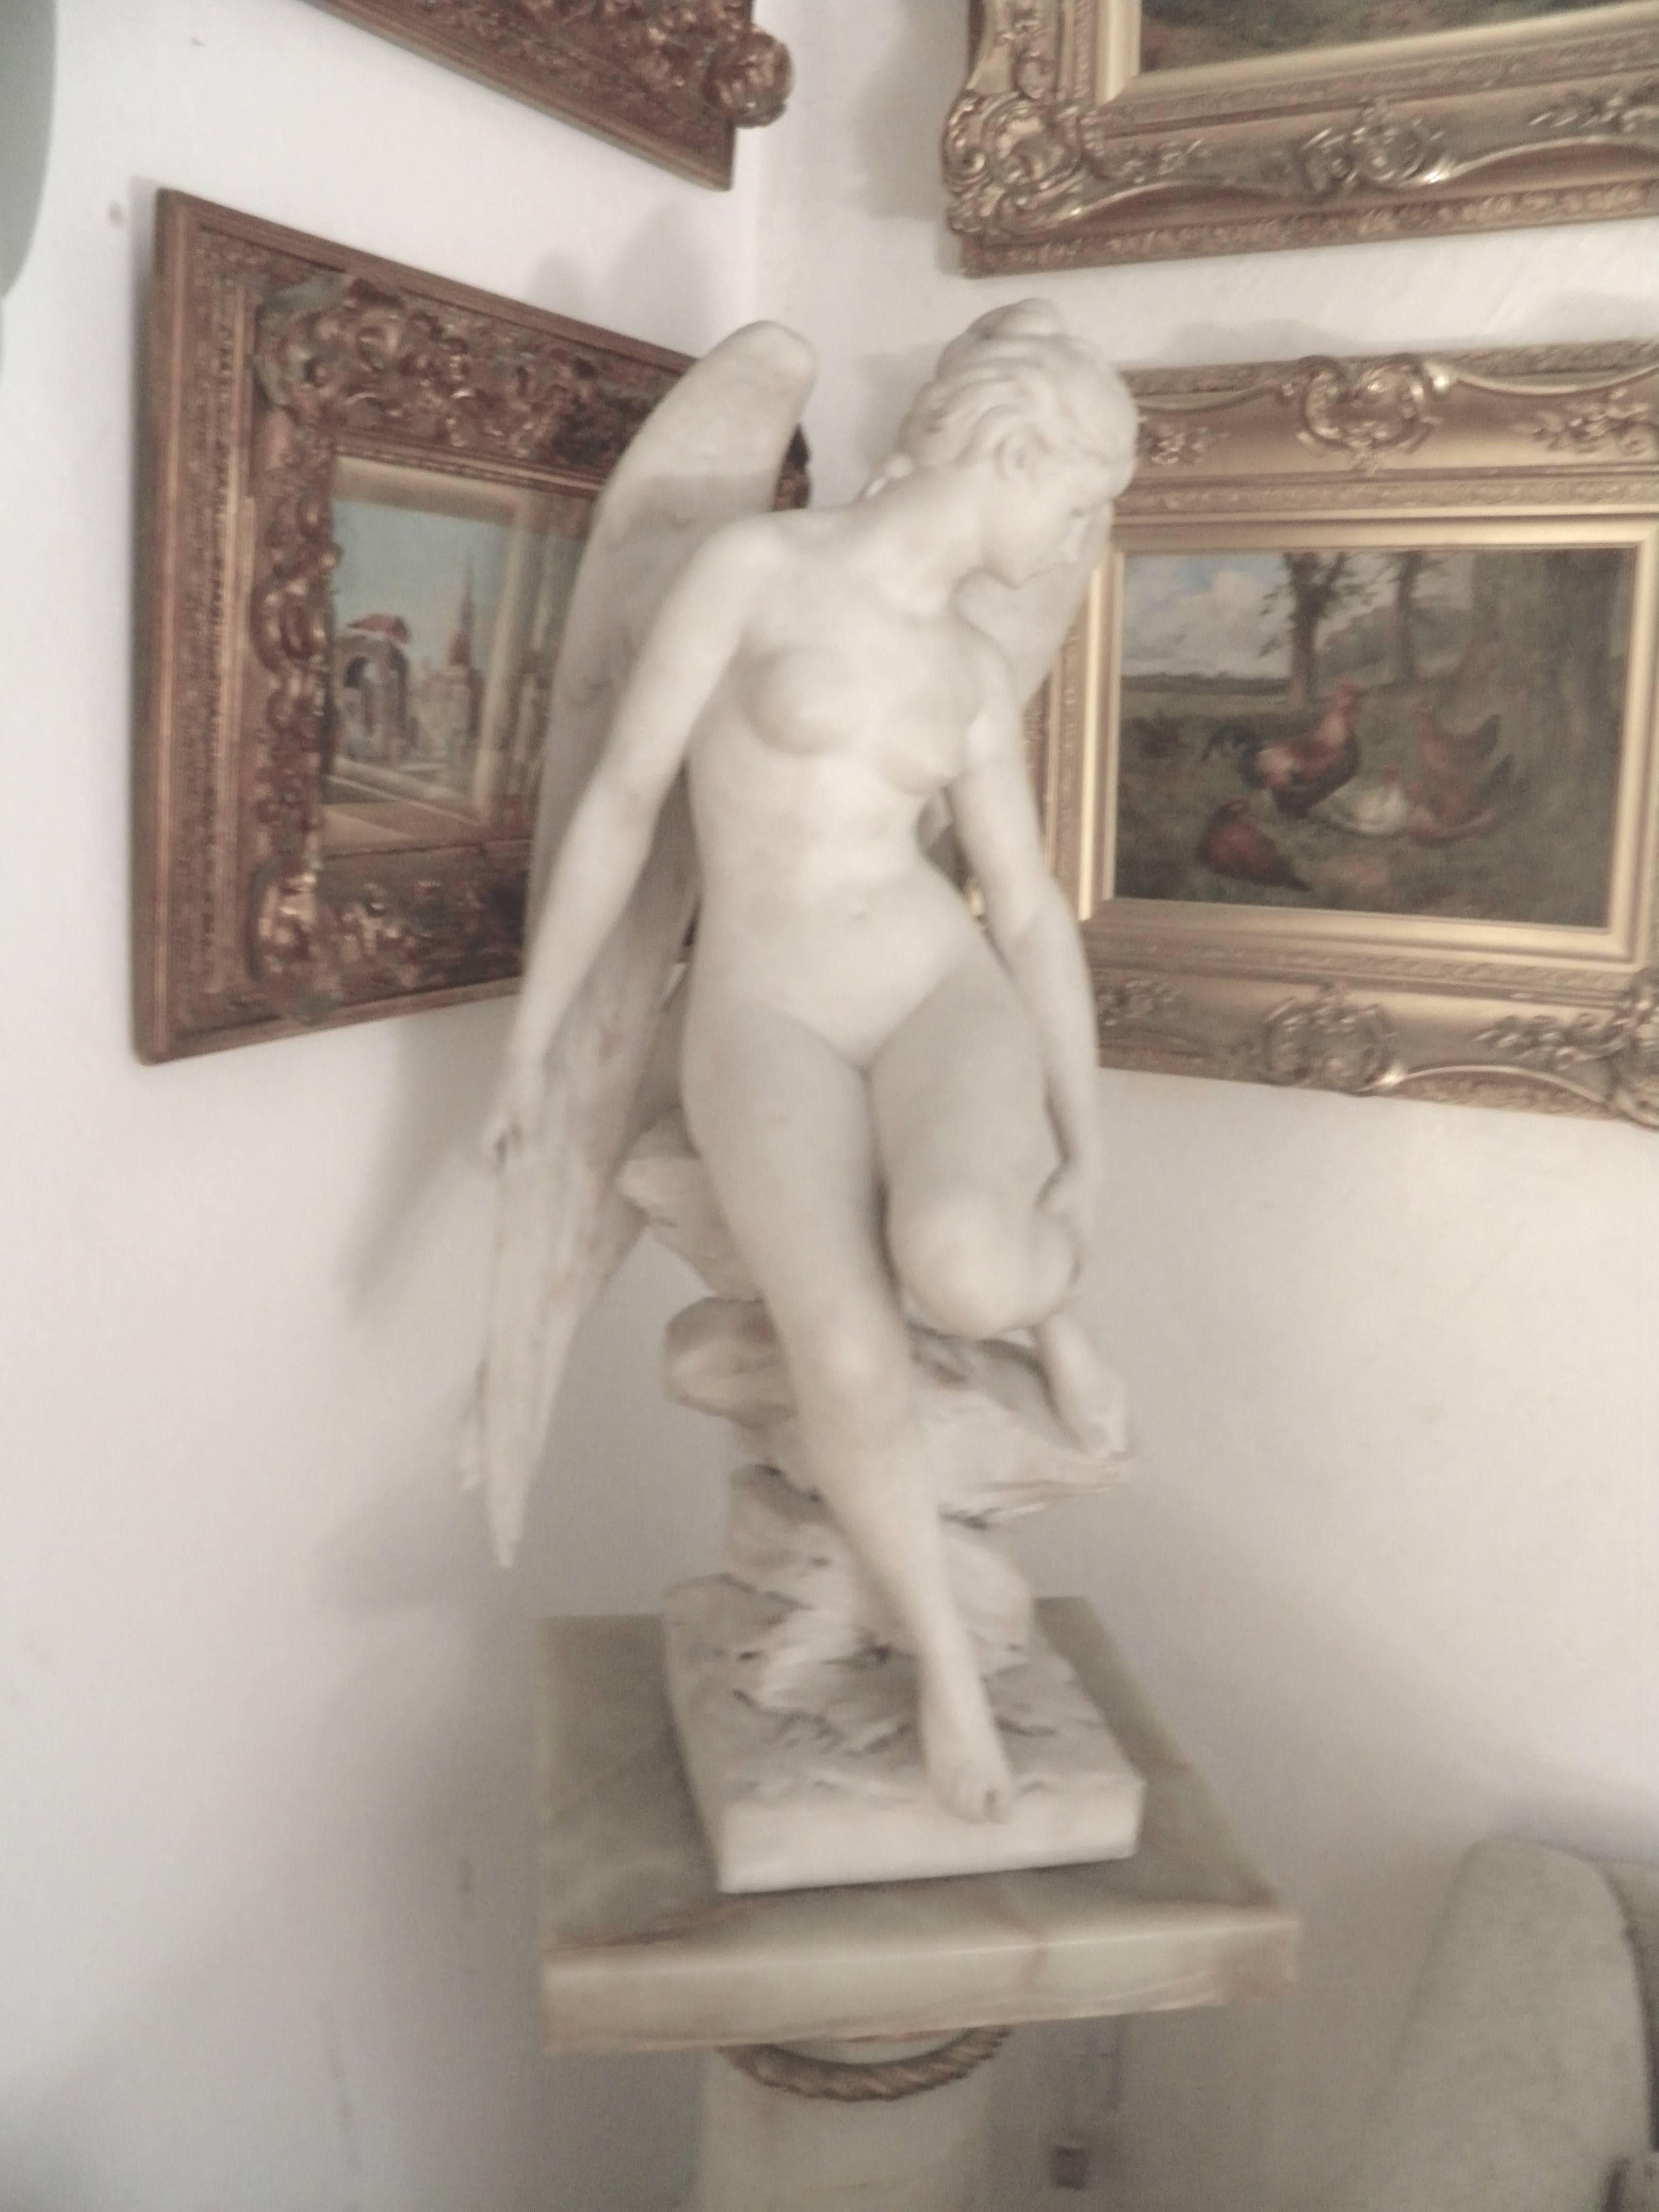 Rare Lucious large Carrara marble masterpiece,  19th Century  by Antonio Piazza..The Ultimate Symbol of Luxury and Wealth!
Crafted of pristine Carrara marble, this enchanting work is both highly detailed and endearingly emotive. The Angel has a